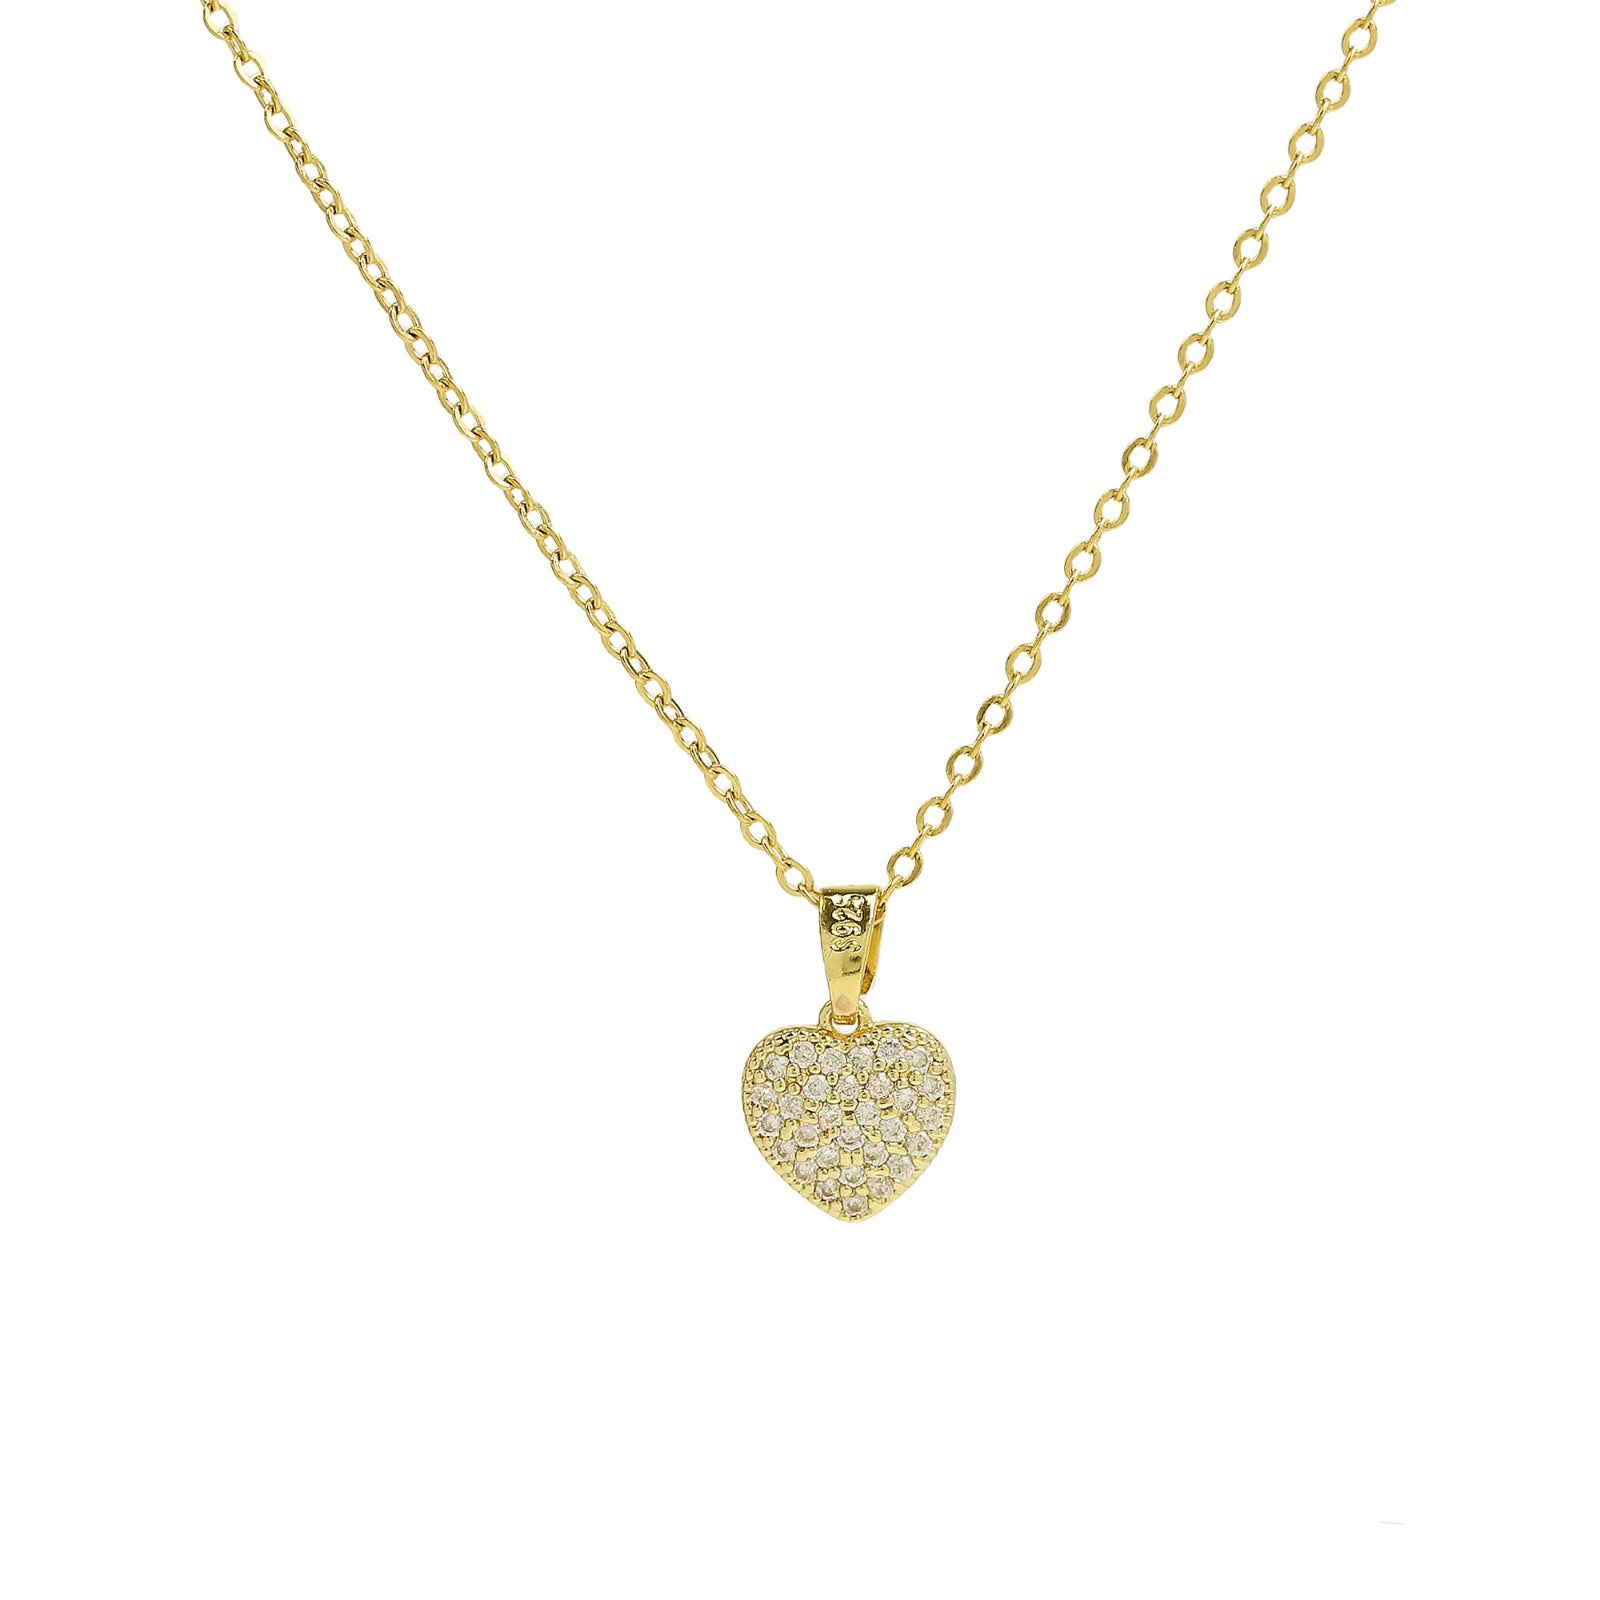 The Heart of Glitter Gold Necklace